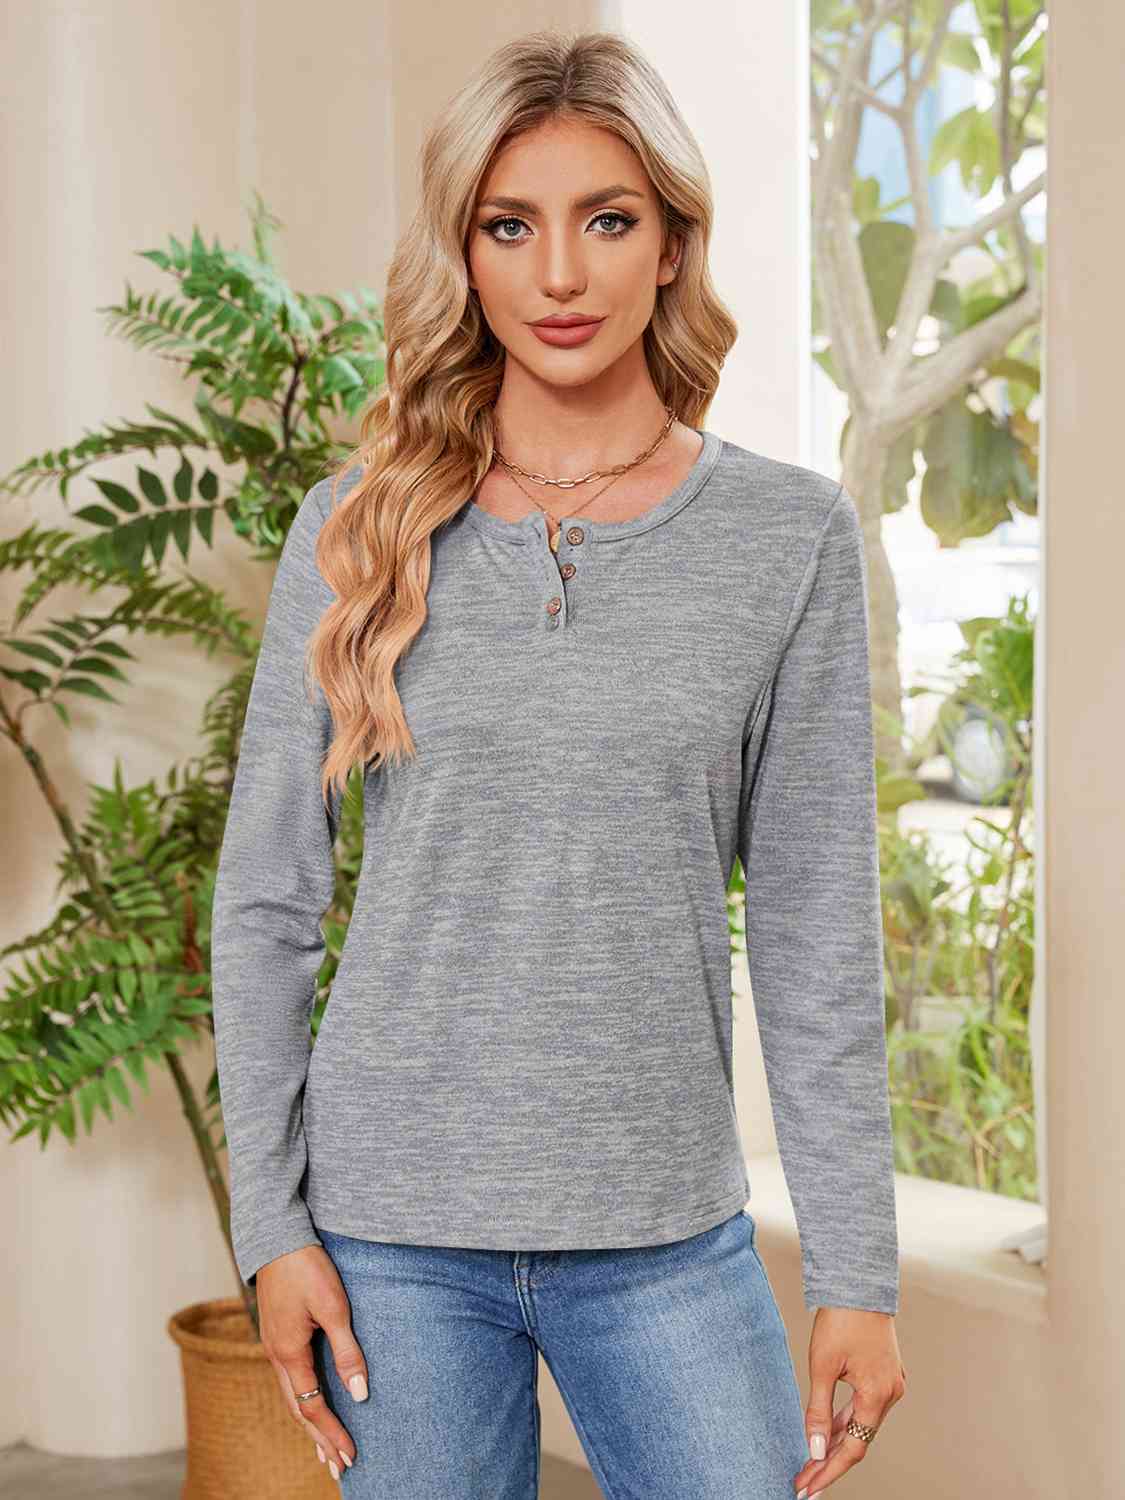 Dark Gray Buttoned Round Neck  Long Sleeve T-Shirt Sentient Beauty Fashions Apparel & Accessories